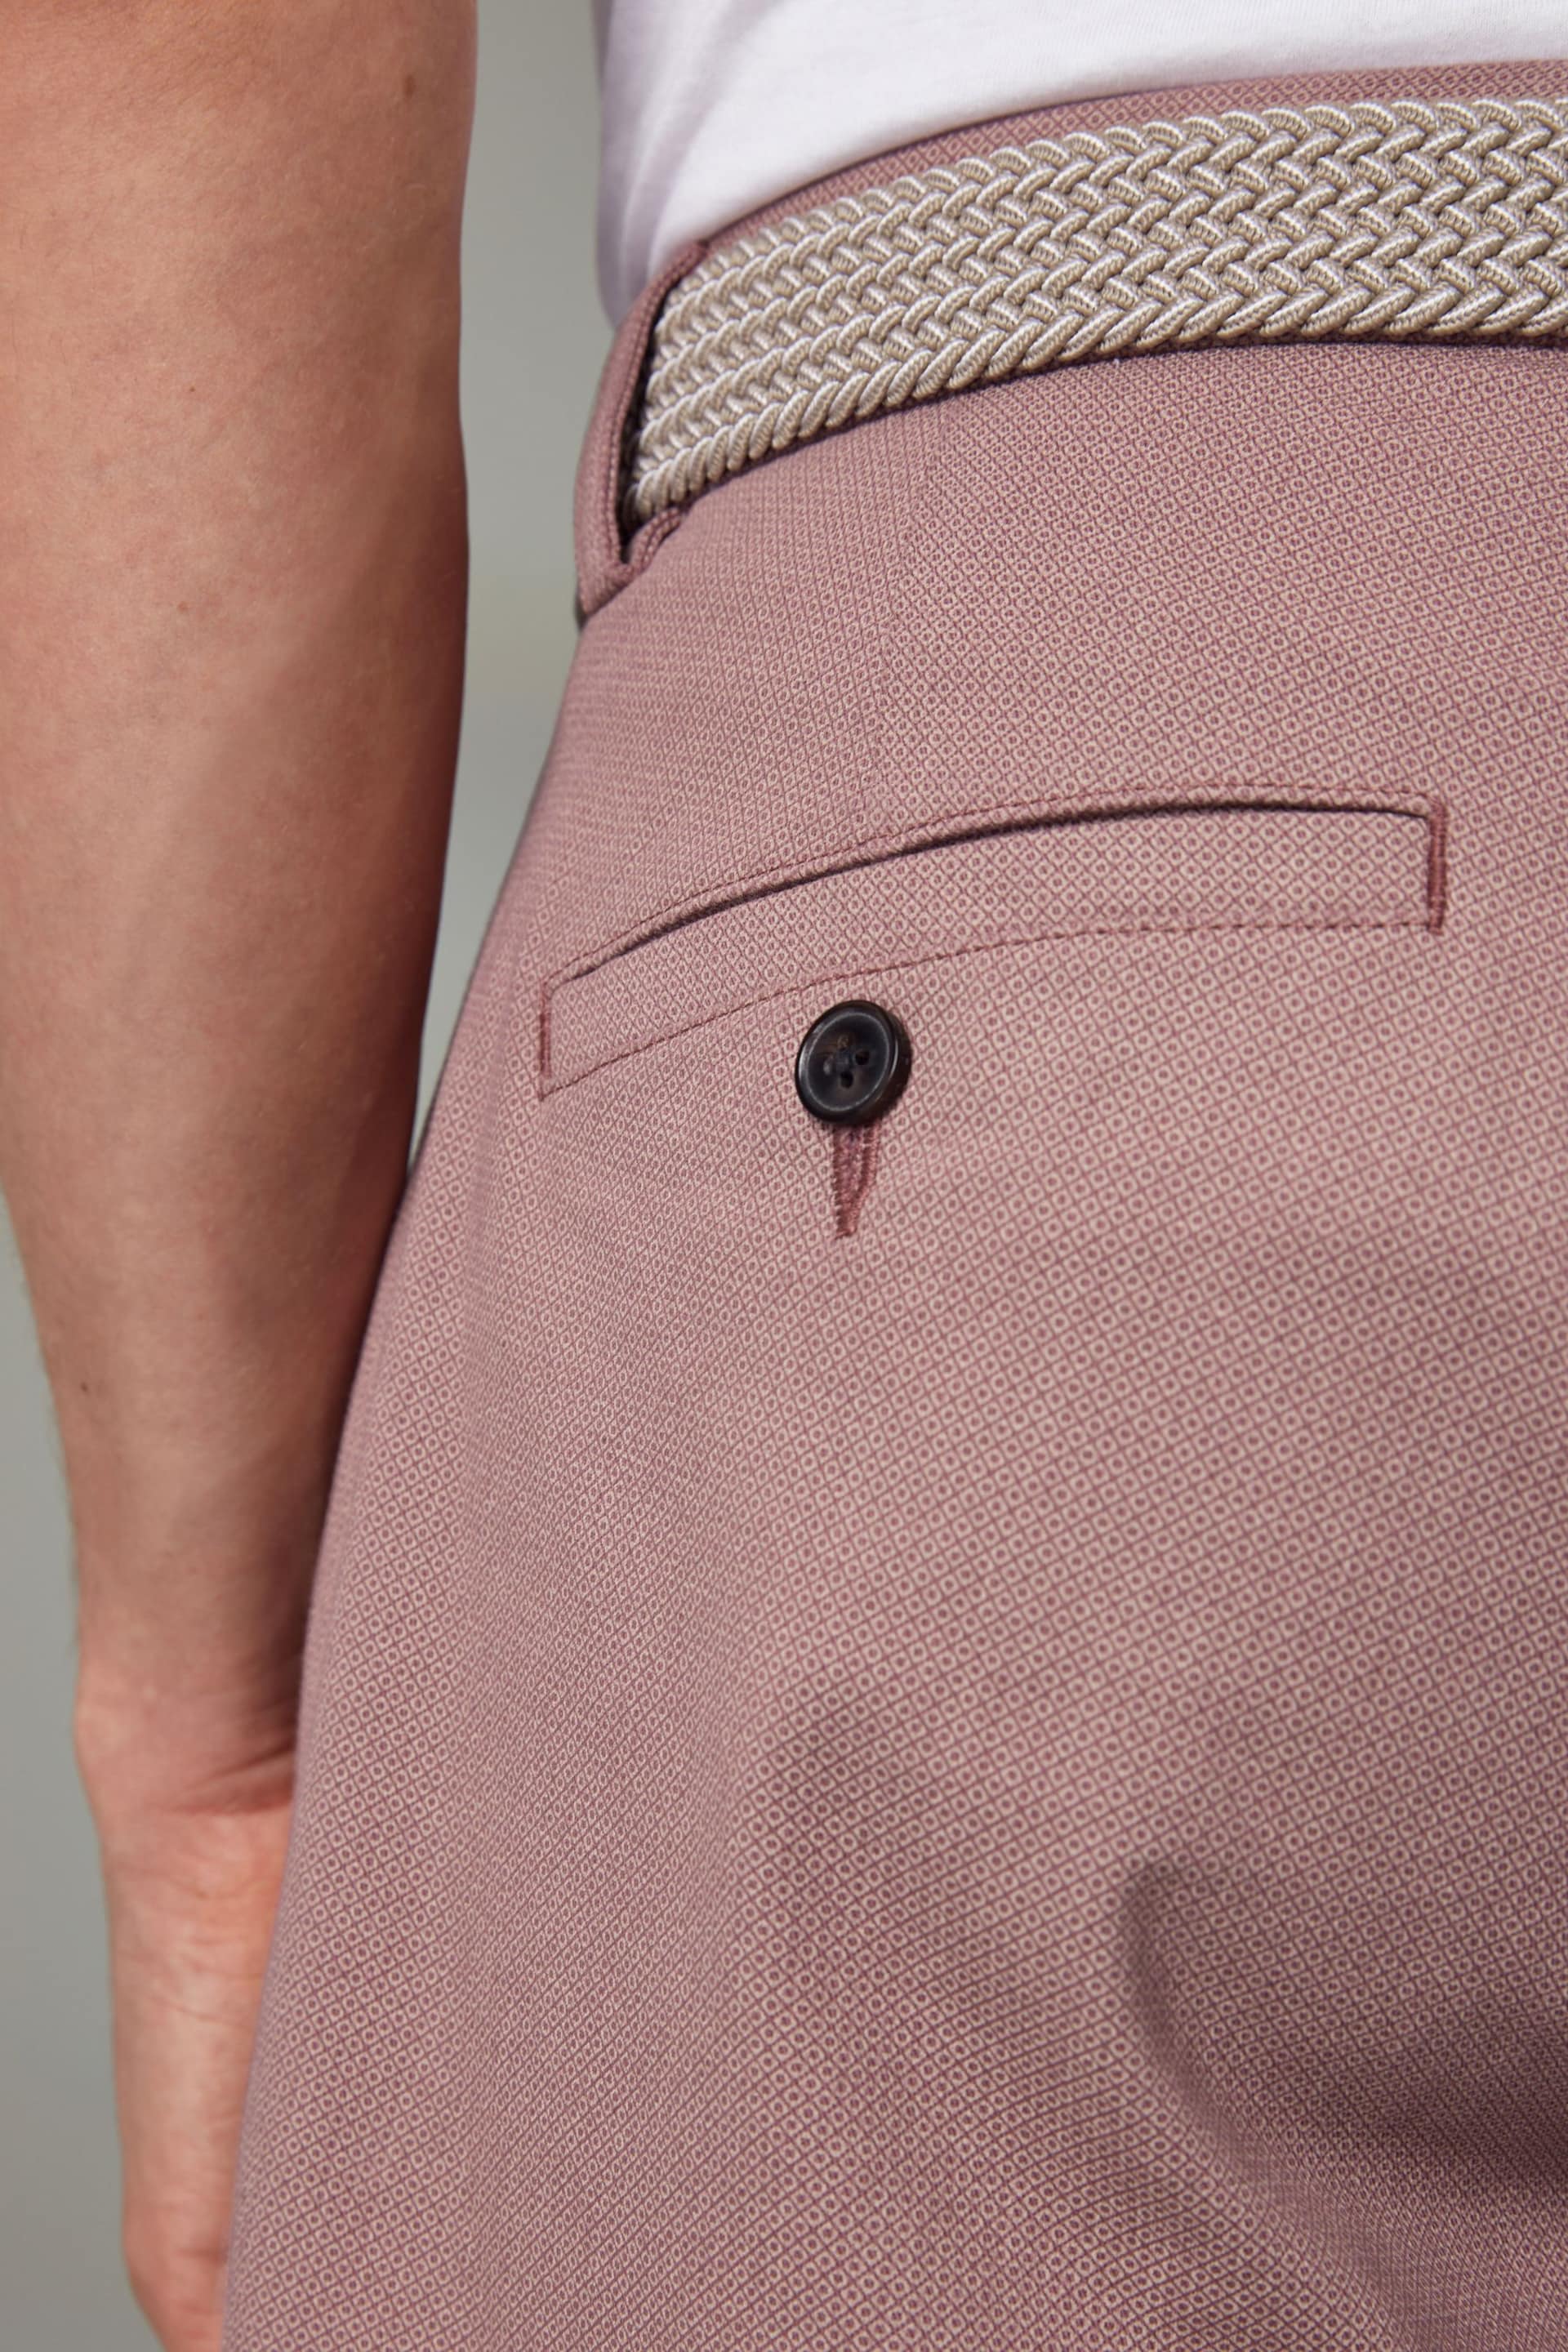 Pink Textured Cotton Blend Chino Shorts with Belt Included - Image 3 of 9